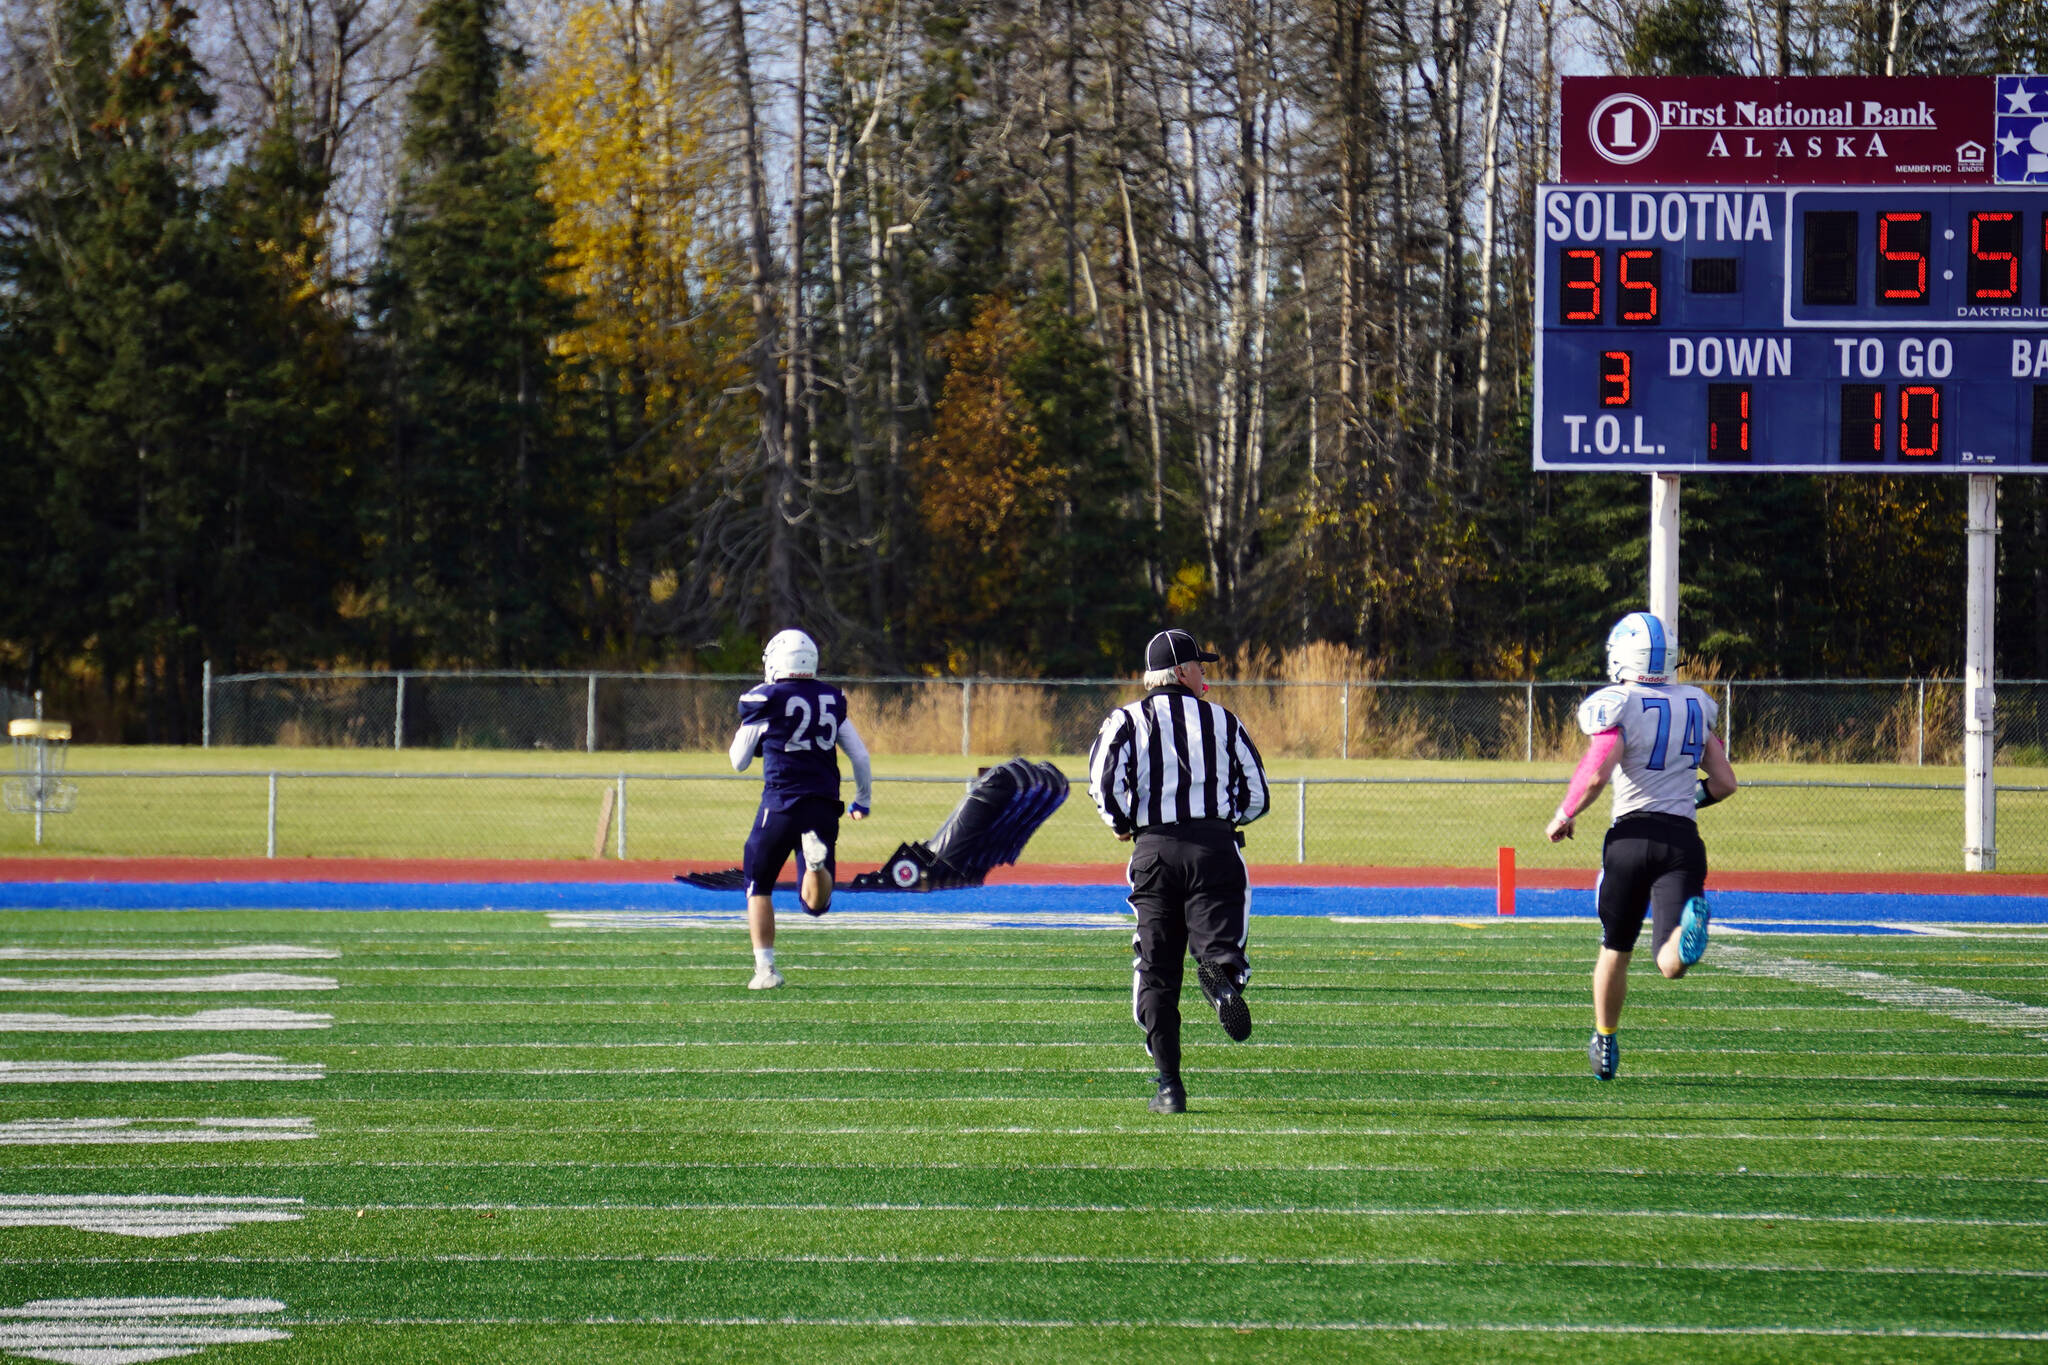 Soldotna’s Gehret Medcoff completes a 95 yard run for a touchdown, pursued by Chugiak’s Ethan Maddox, during a Division II playoff game at Justin Maile Field in Soldotna, Alaska, on Saturday, Oct. 7, 2023. (Jake Dye/Peninsula Clarion)